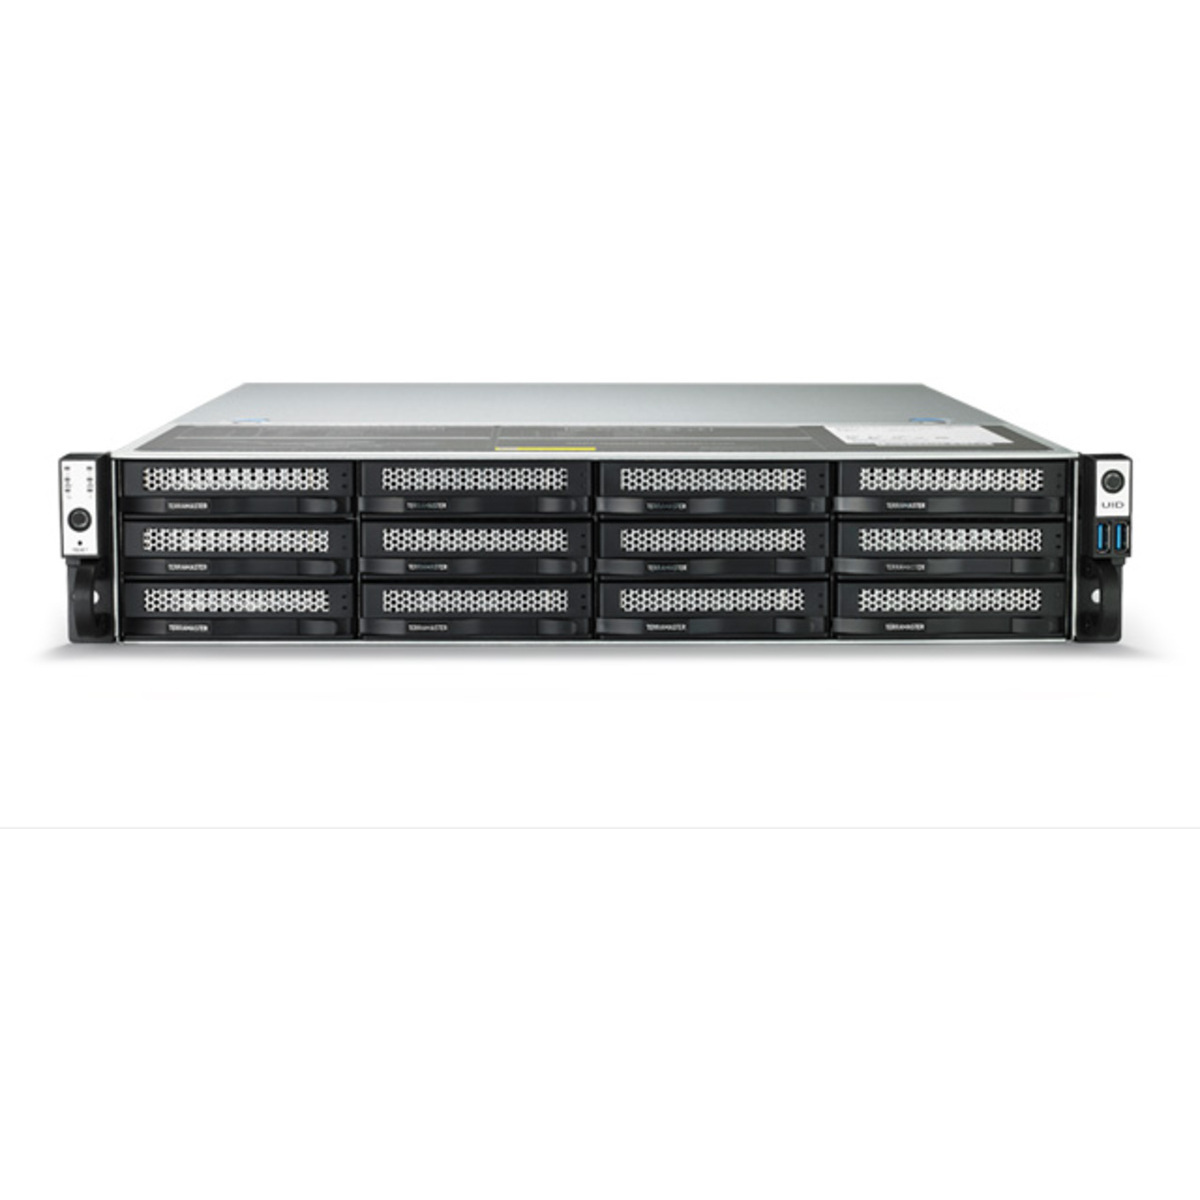 TerraMaster U12-722-2224 198tb 12-Bay RackMount Large Business / Enterprise NAS - Network Attached Storage Device 9x22tb Western Digital Red Pro WD221KFGX 3.5 7200rpm SATA 6Gb/s HDD NAS Class Drives Installed - Burn-In Tested U12-722-2224